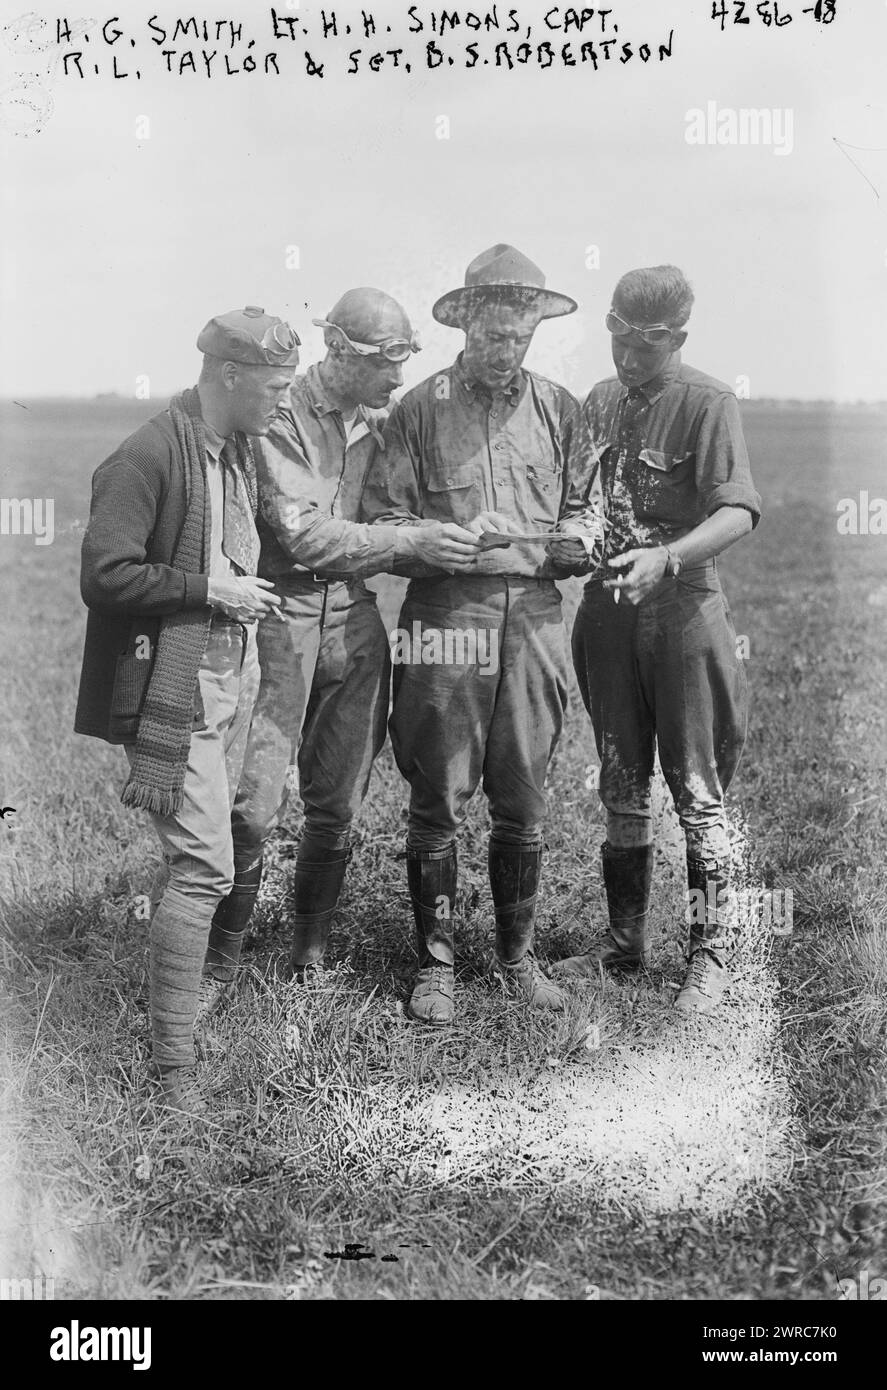 H.G. Smith, Lt. H.H. Simons, Capt. R.L. Taylor & Sgt. B.S. Robertson, Photograph shows instructor H.G. Smith, First Lt. Henry H. Simons, Capt. R.L. Taylor and First Lt. Benjamin S. Robertson who were a part of the Signal Corps Aviation School at Mineola, Long Island, New York, between May and August of 1917 during World War I., 1917, World War, 1914-1918, Glass negatives, 1 negative: glass Stock Photo